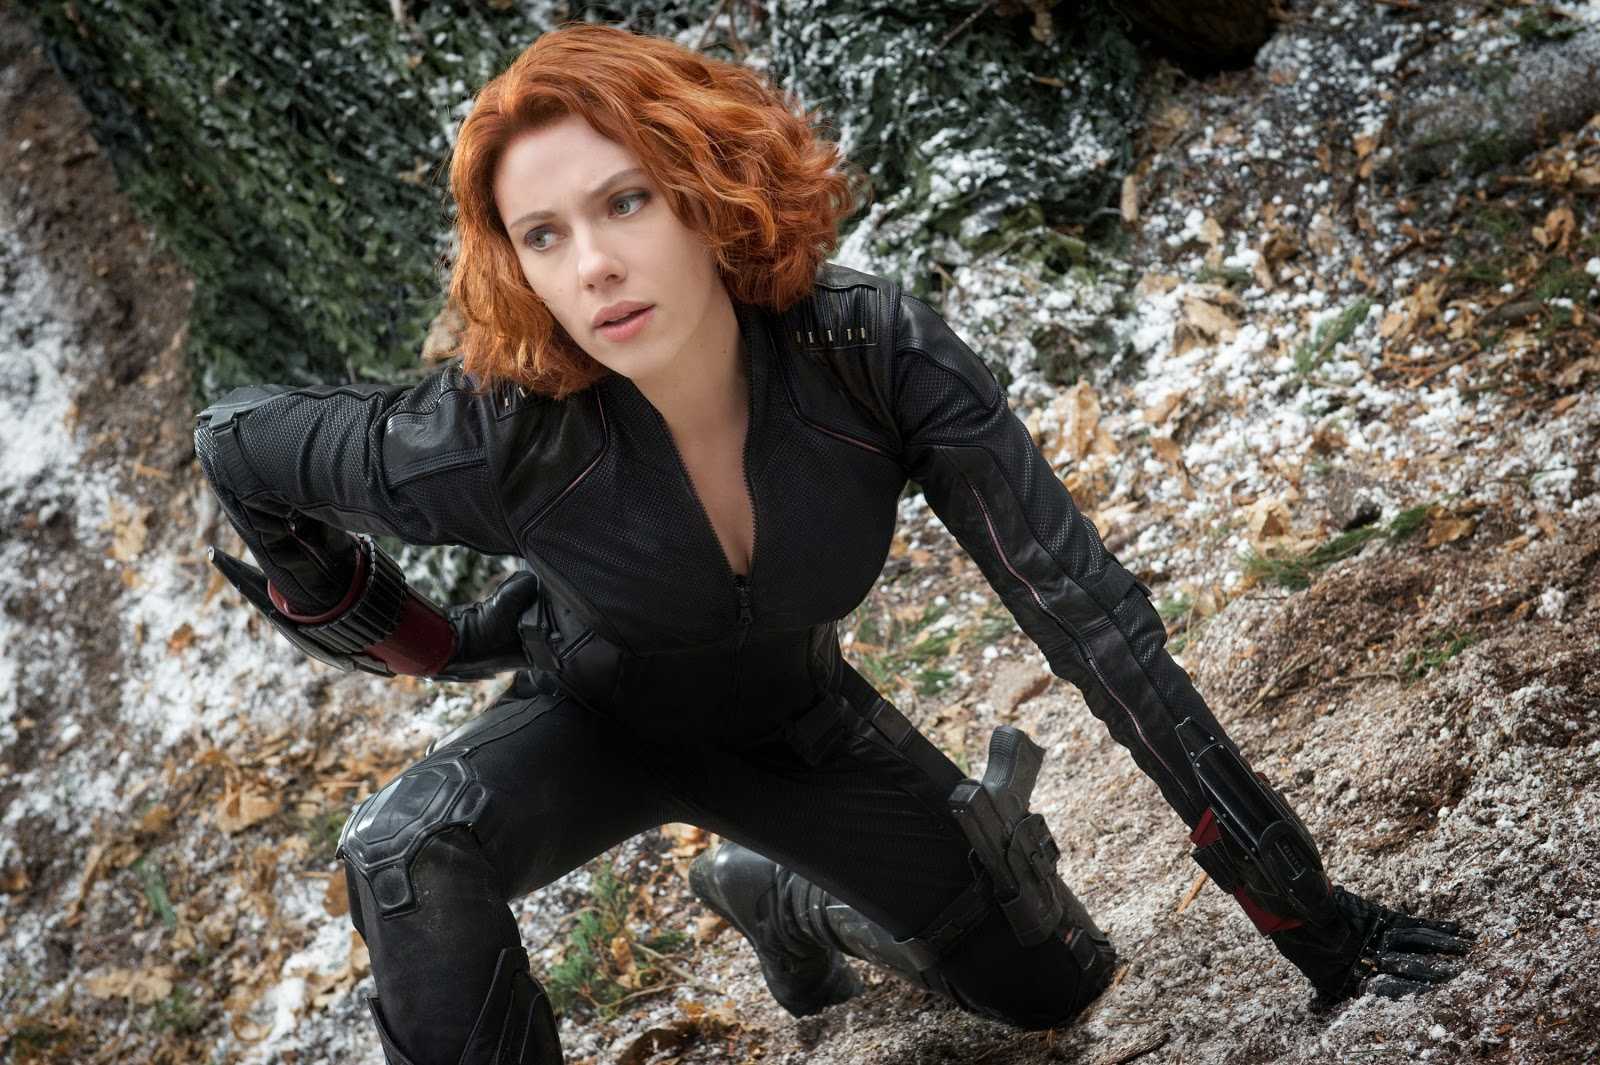 'I'm more accepting of myself': Scarlett Johansson reflects on Black Widow's growth in Marvel Cinematic Universe